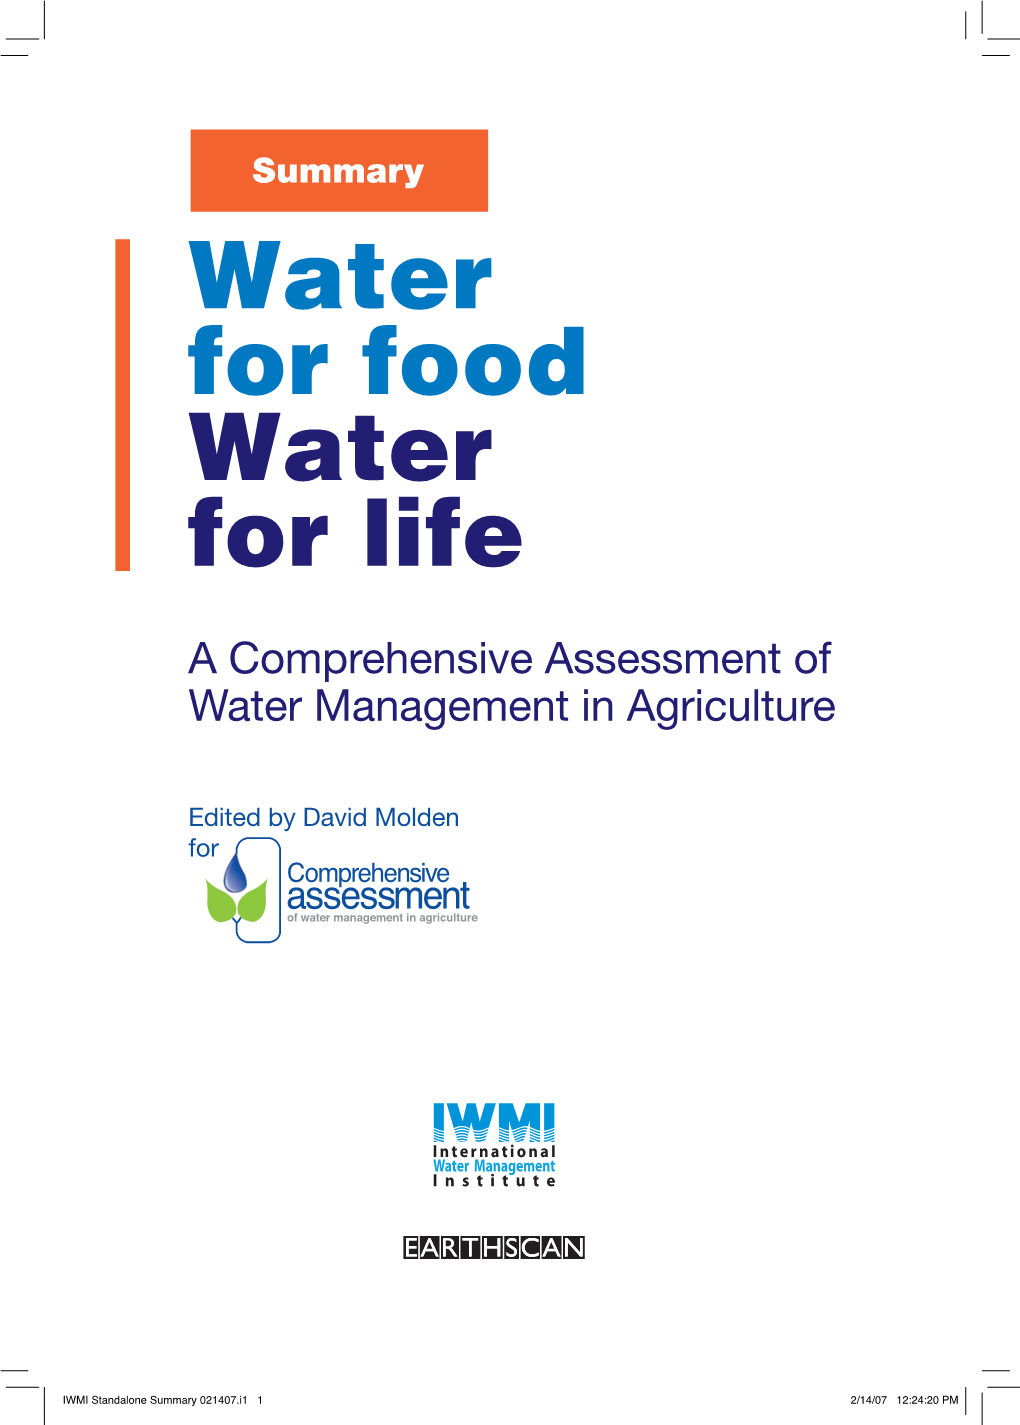 A Comprehensive Assessment of Water Management in Agriculture